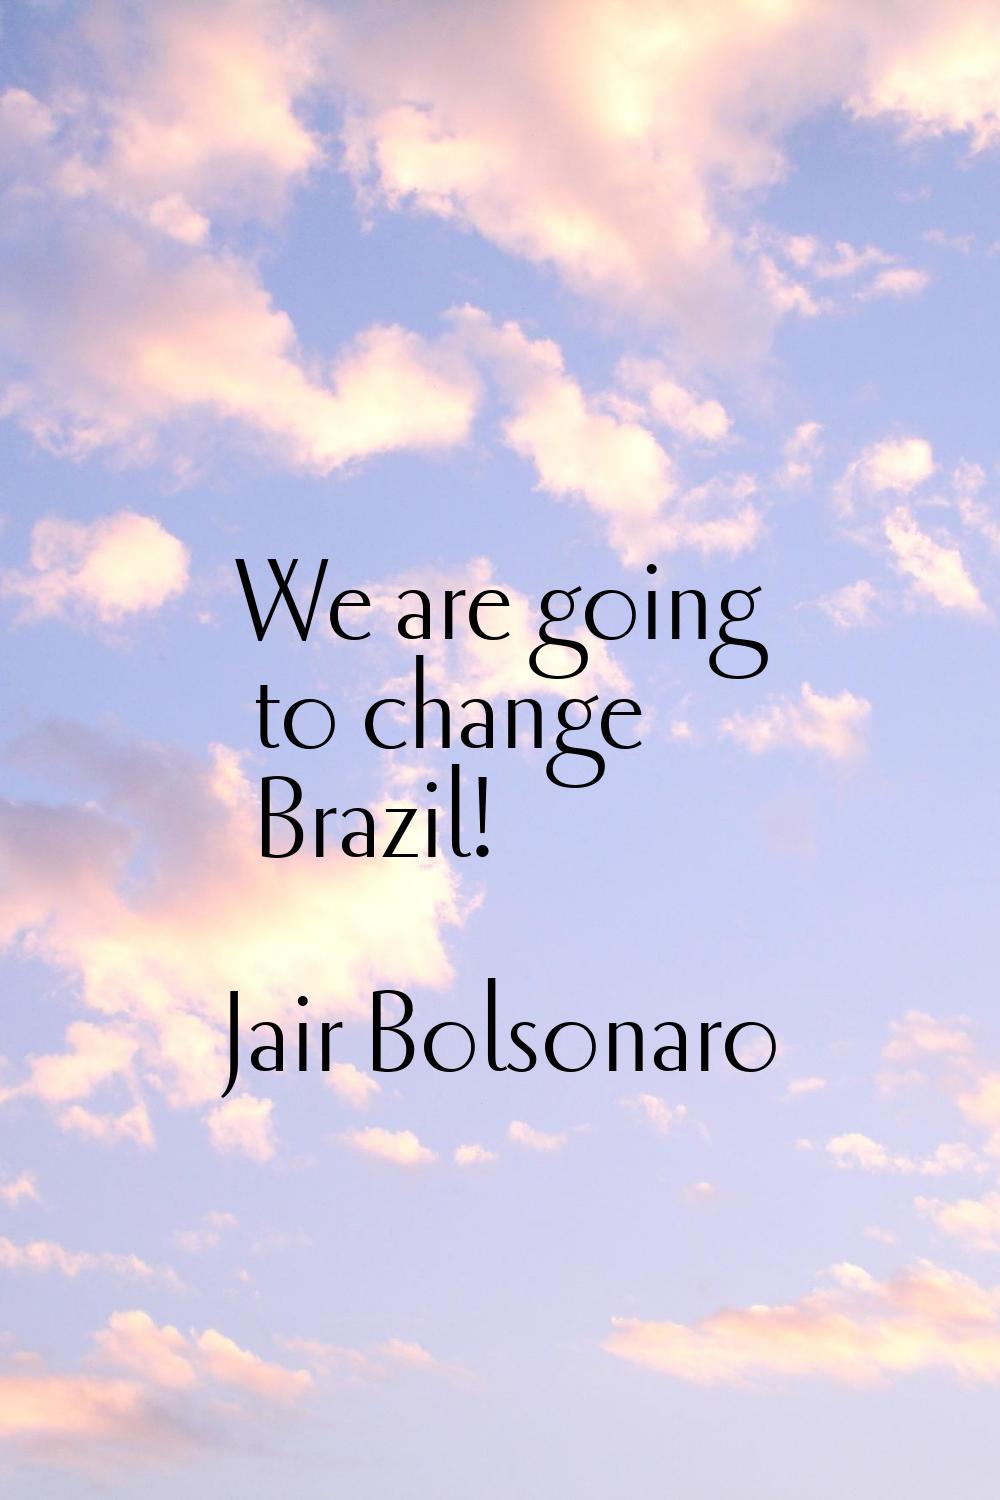 We are going to change Brazil!